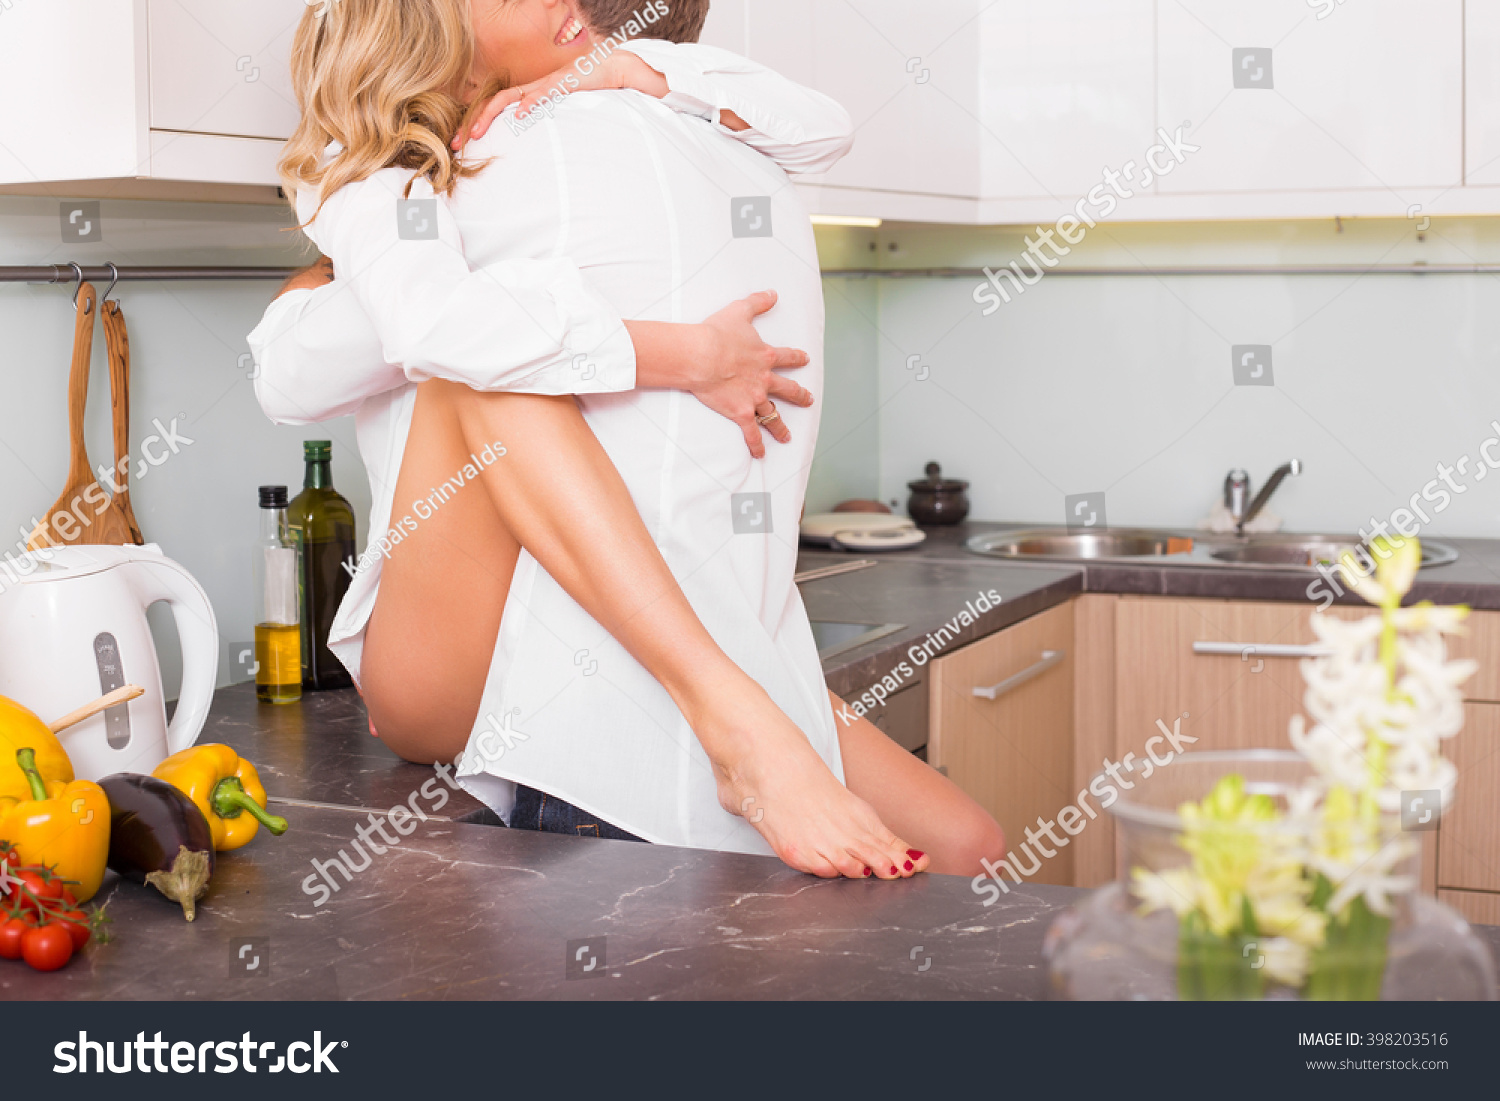 Sex On The Counter 47